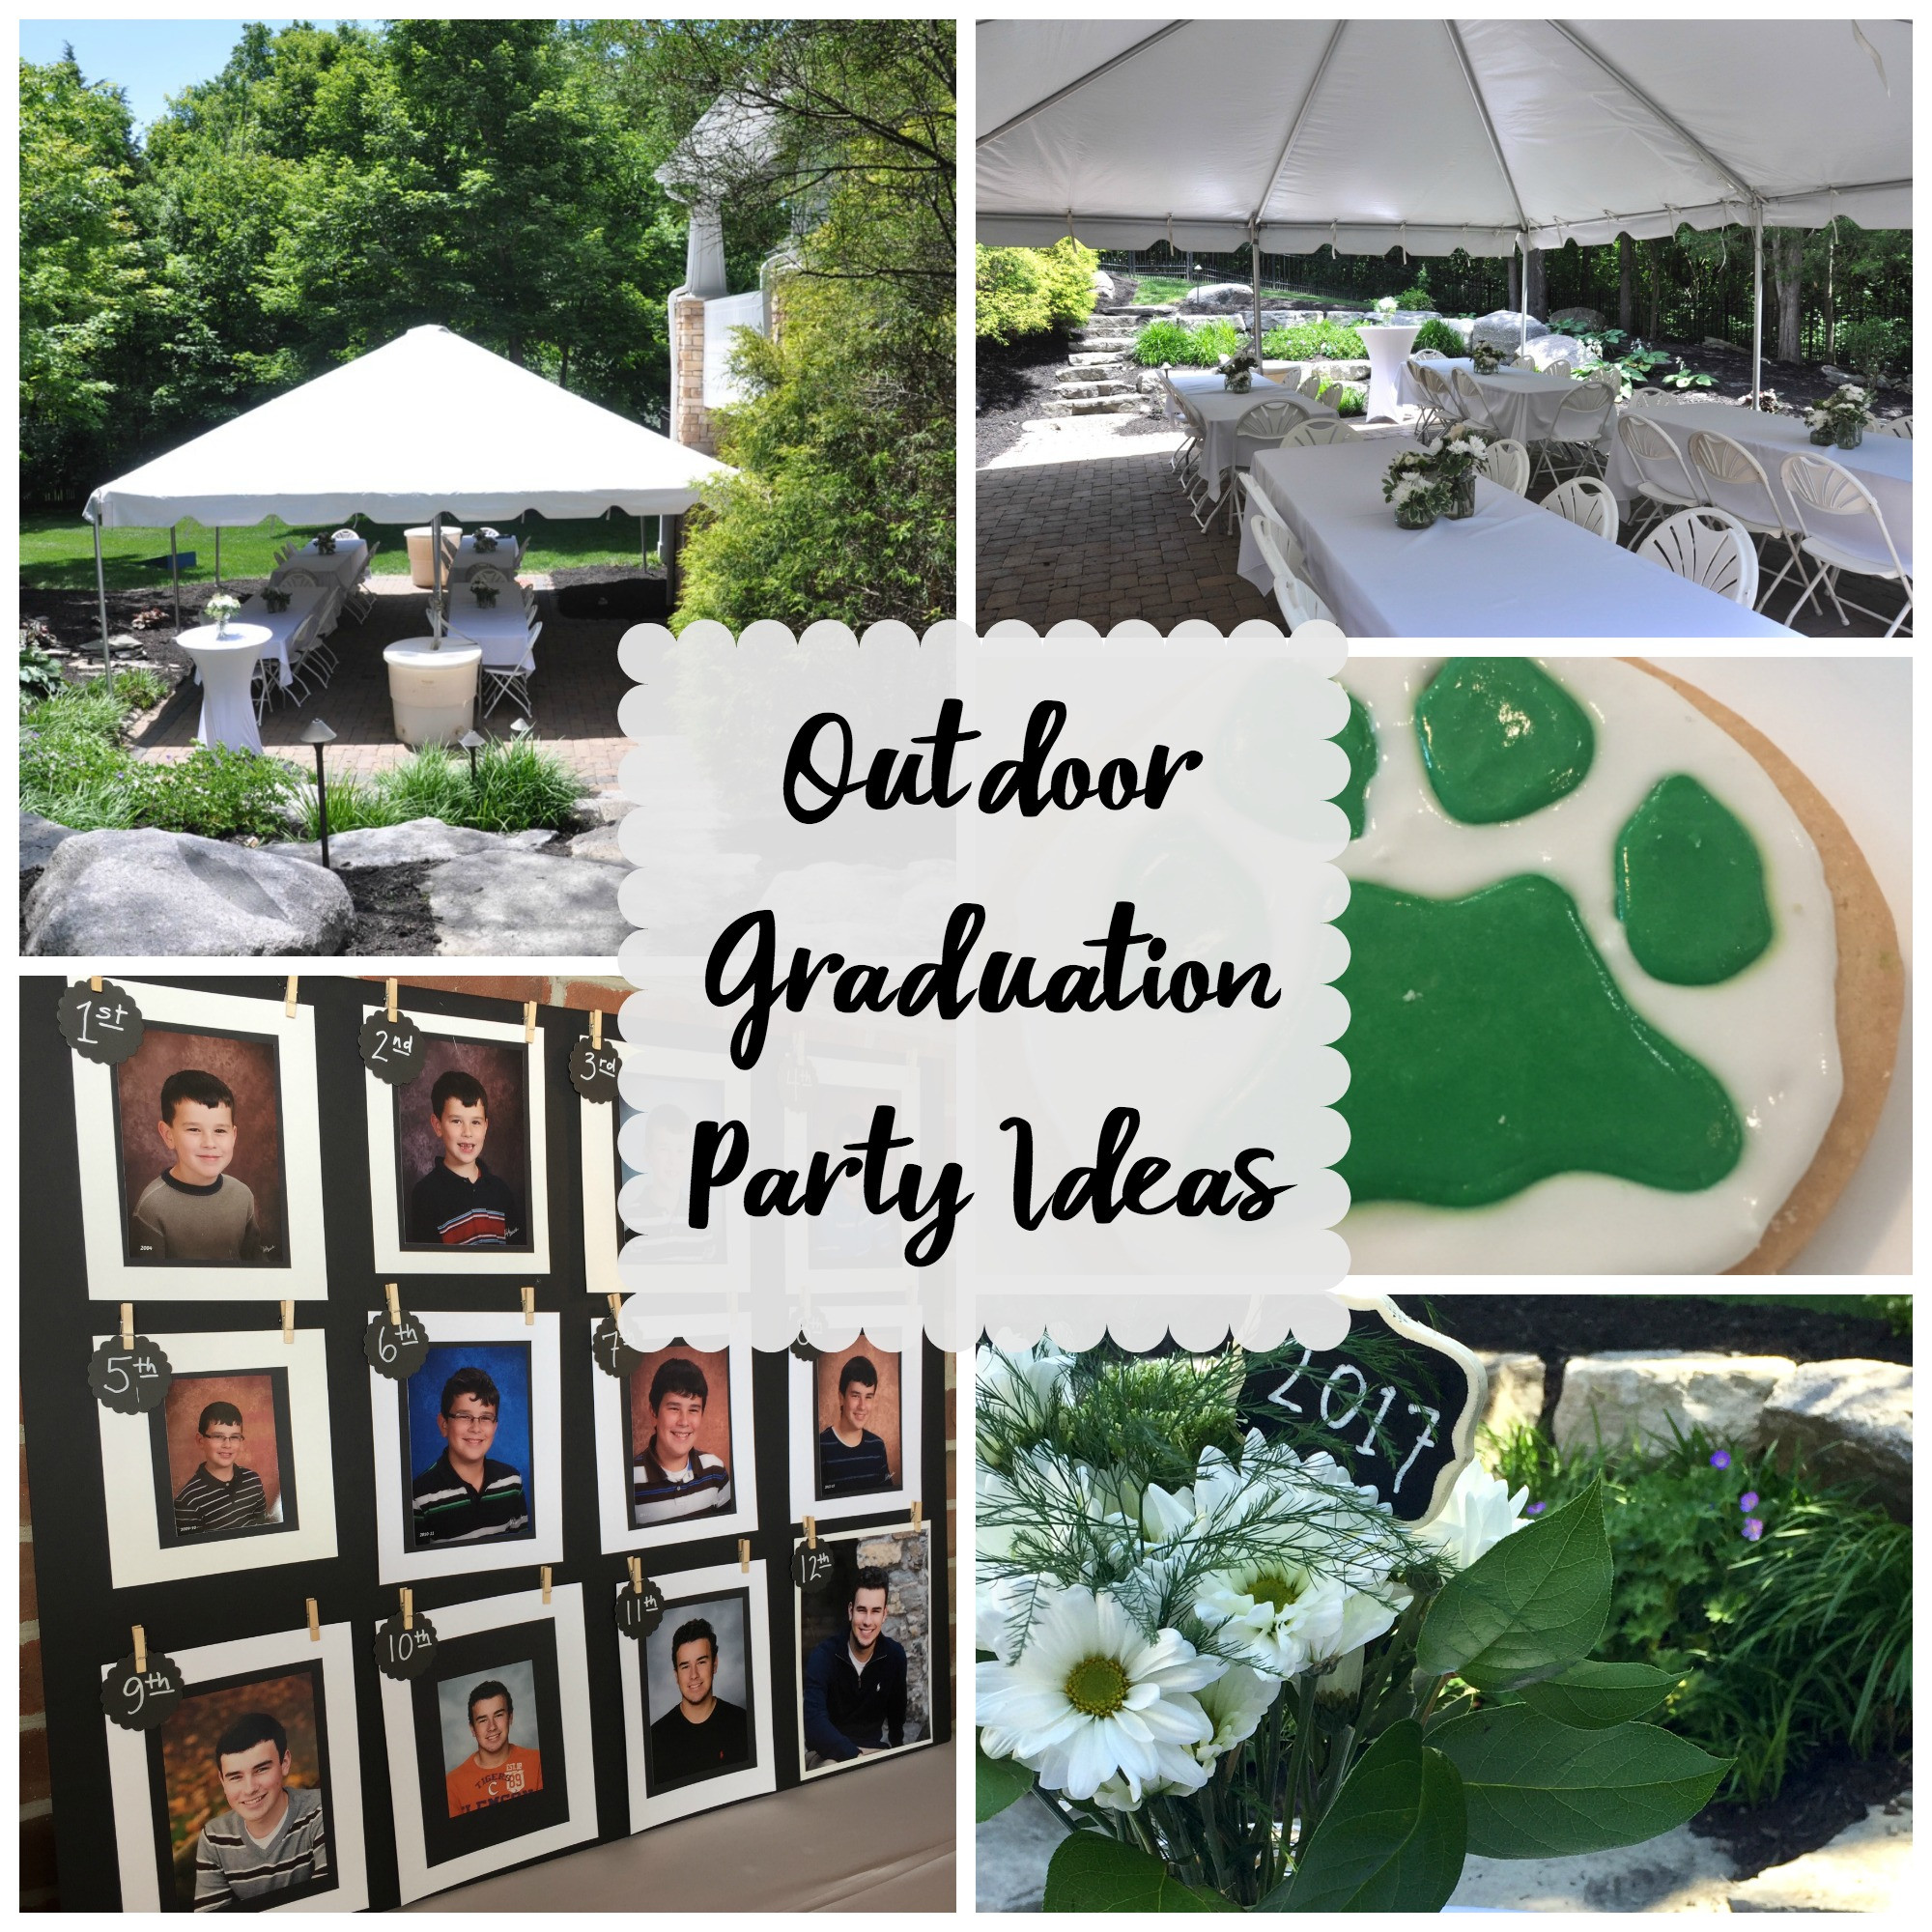 Graduation Party Ideas In The Backyard
 Outdoor Graduation Party Evolution of Style